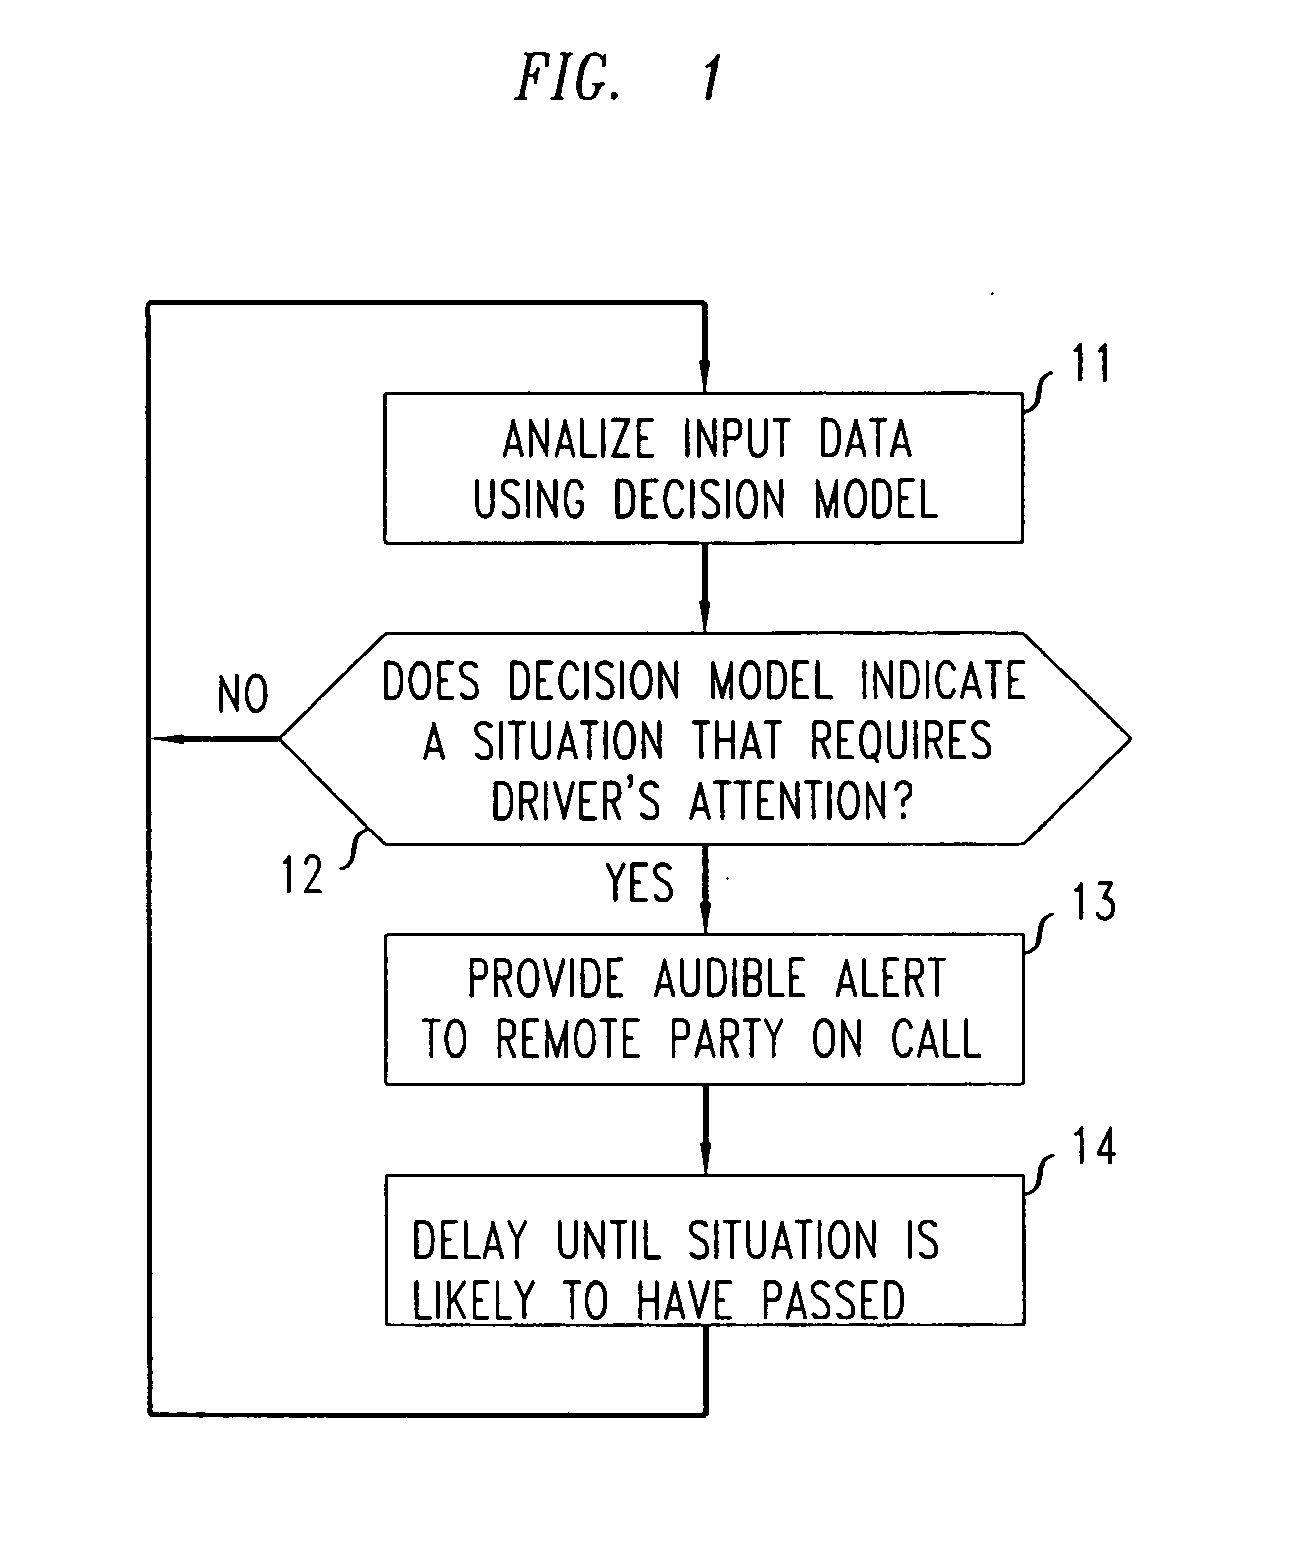 Method and apparatus for alerting mobile telephone call participants that a vehicle's driver is occupied